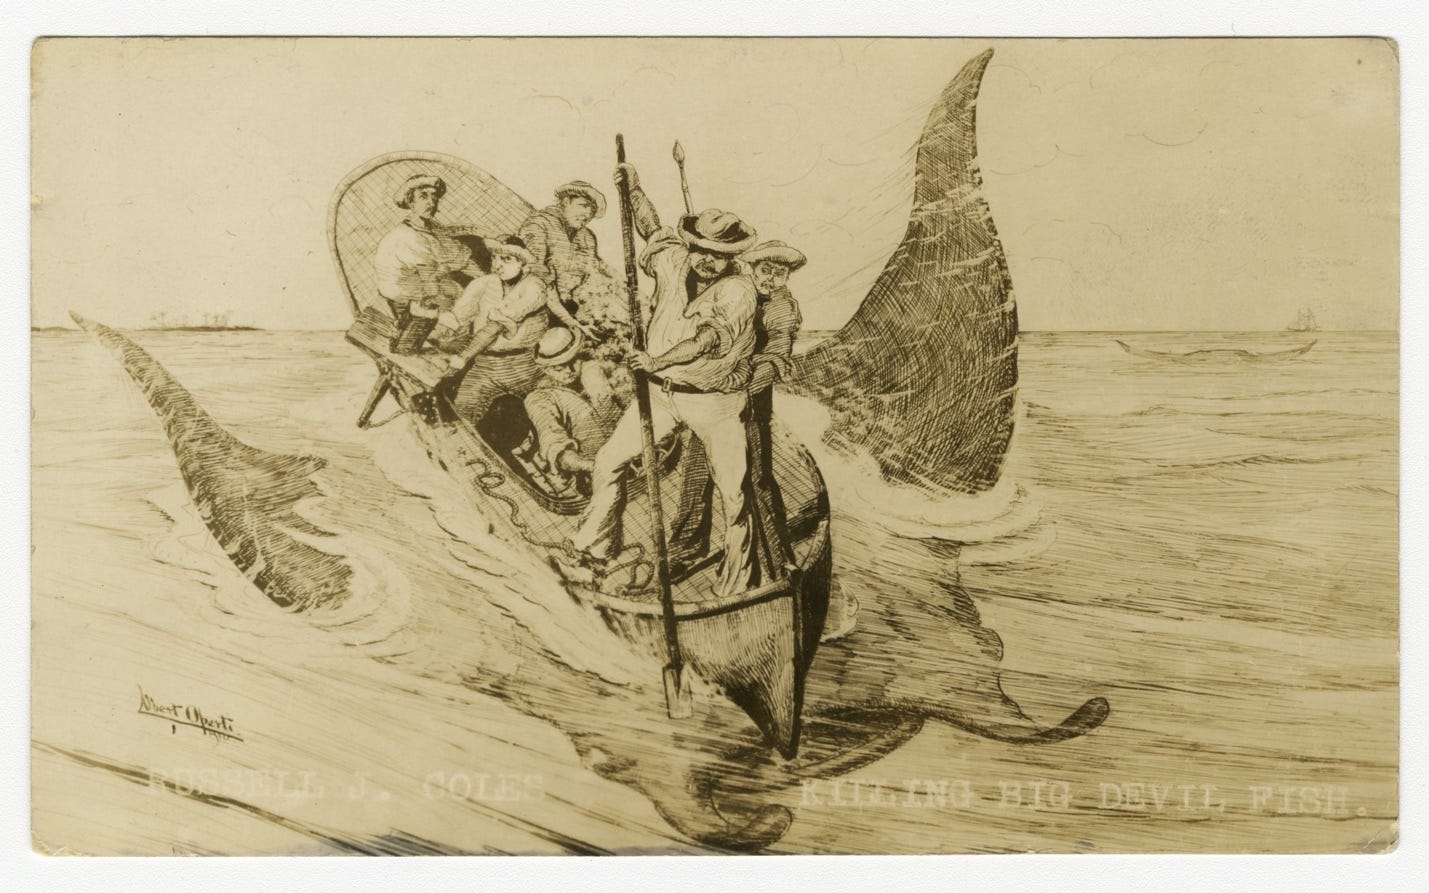 An illustration of Russell J. Coles and a crew of men harpooning a giant manta ray